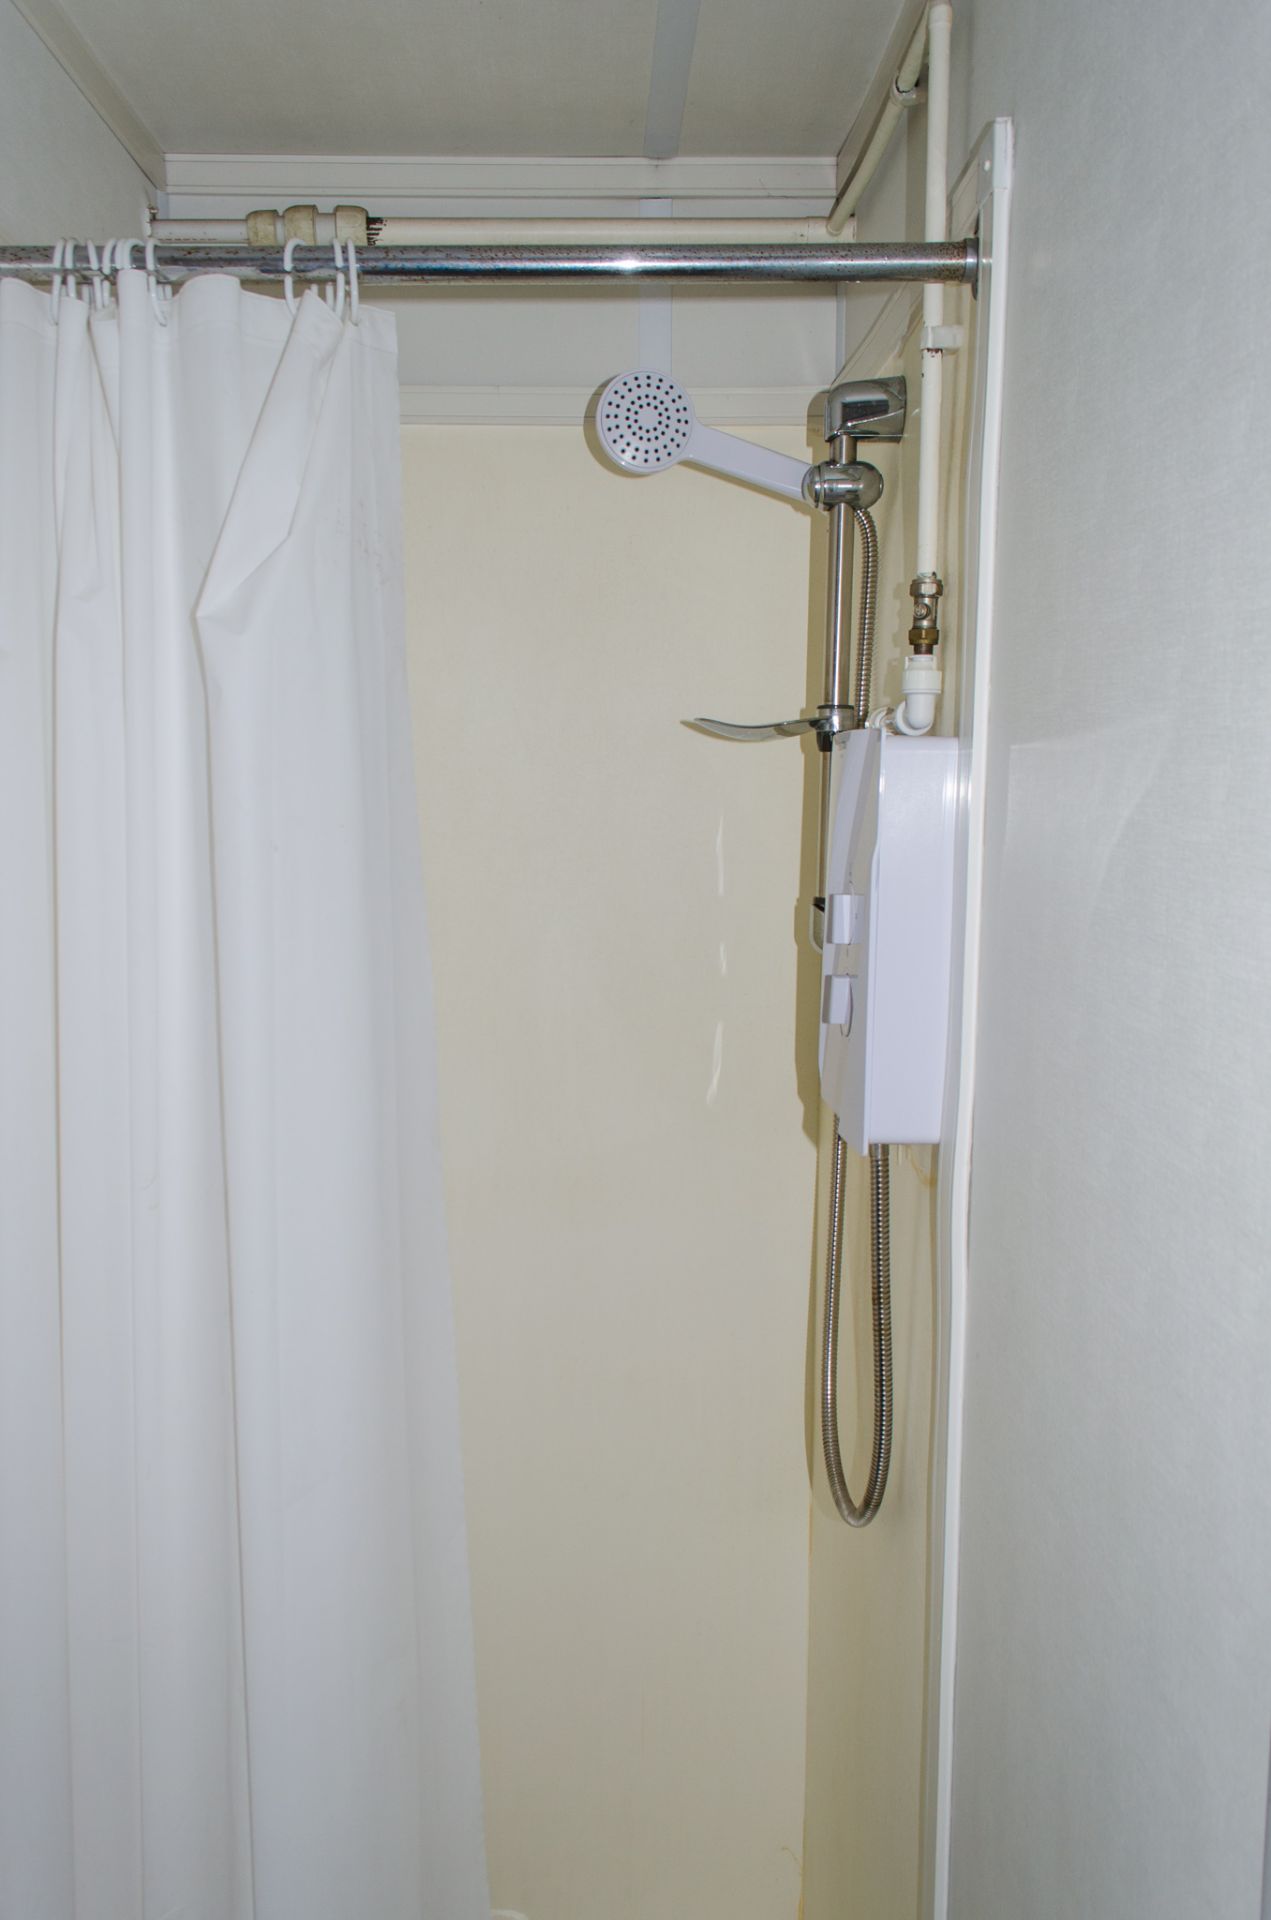 32 ft x 10 ft steel jack leg shower site unit Comprising of 8 - showers & changing area BBA1684 - Image 7 of 14